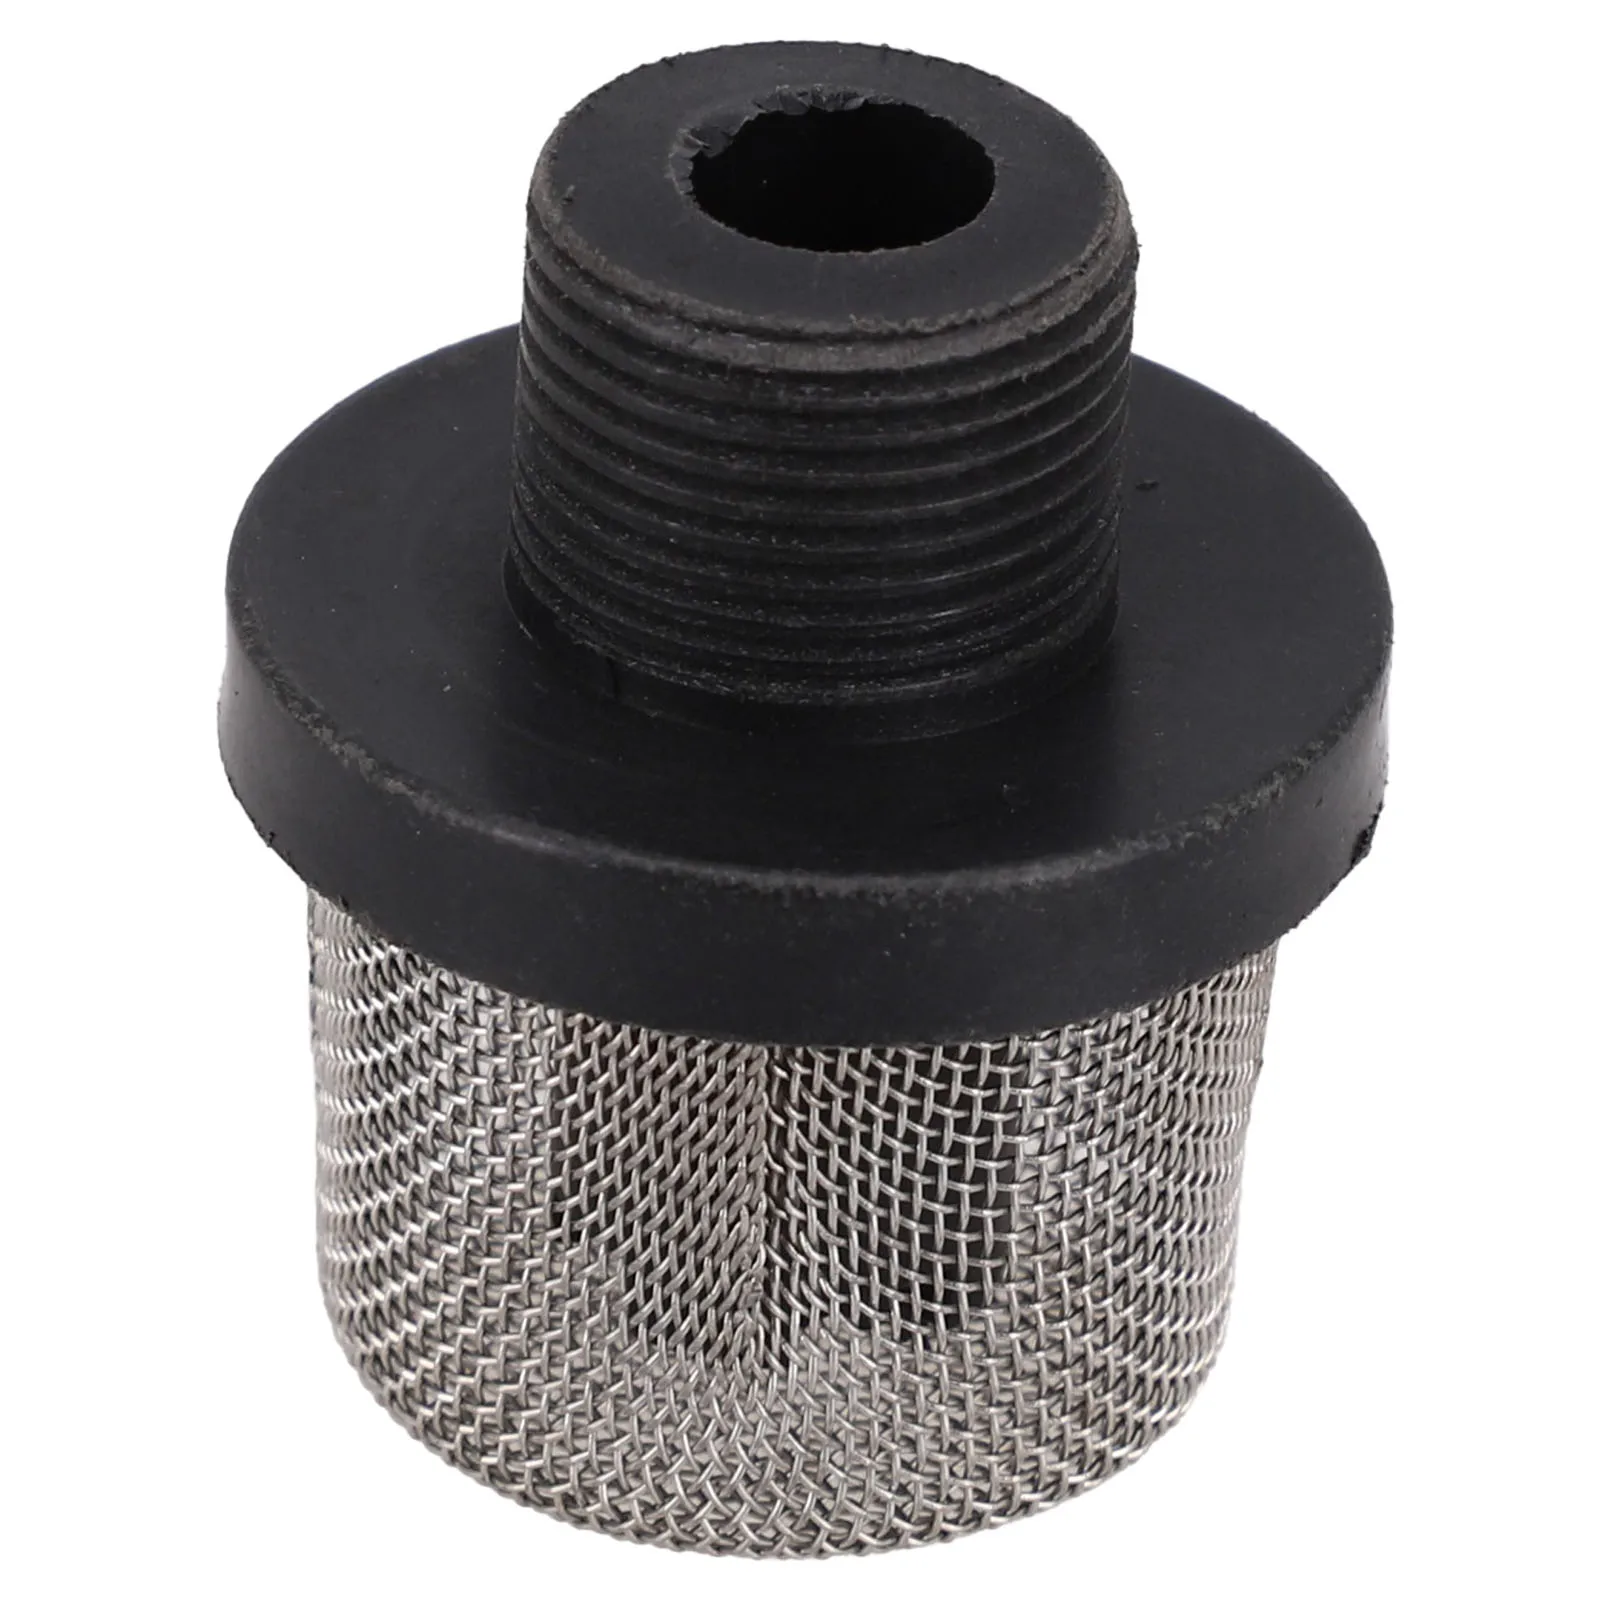 Eco friendly Mesh Filter for Suction Pipe  Lightweight Design  Protects Pump from Contaminants  288716 Part Number 1 inch integral manual hydraulic bender galvanized pipe iron tube steel pipe bending tools high and low pressure plunger design